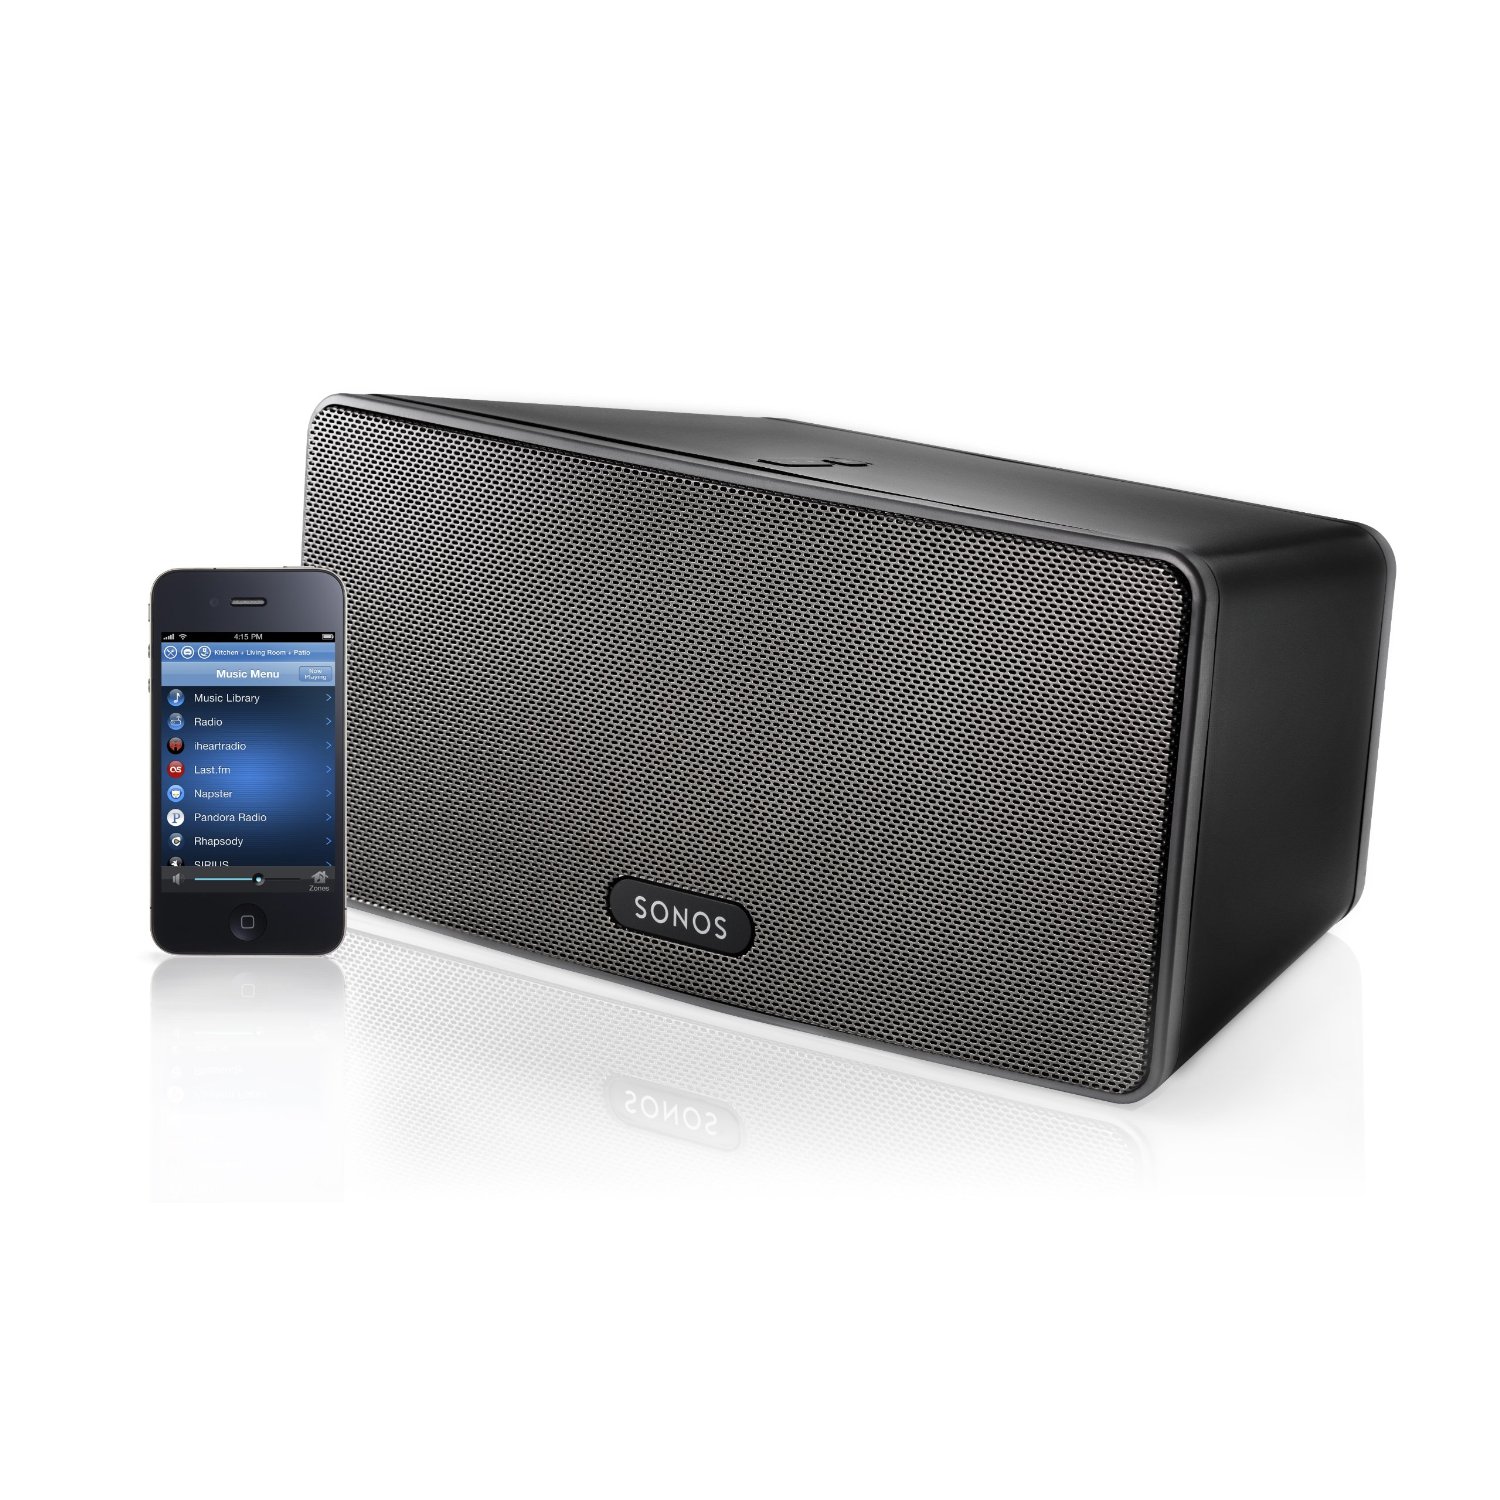 http://thetechjournal.com/wp-content/uploads/images/1108/1314098343-sonos-play3-allinone-wireless-music-player-with-3-integrated-speakers--1.jpg